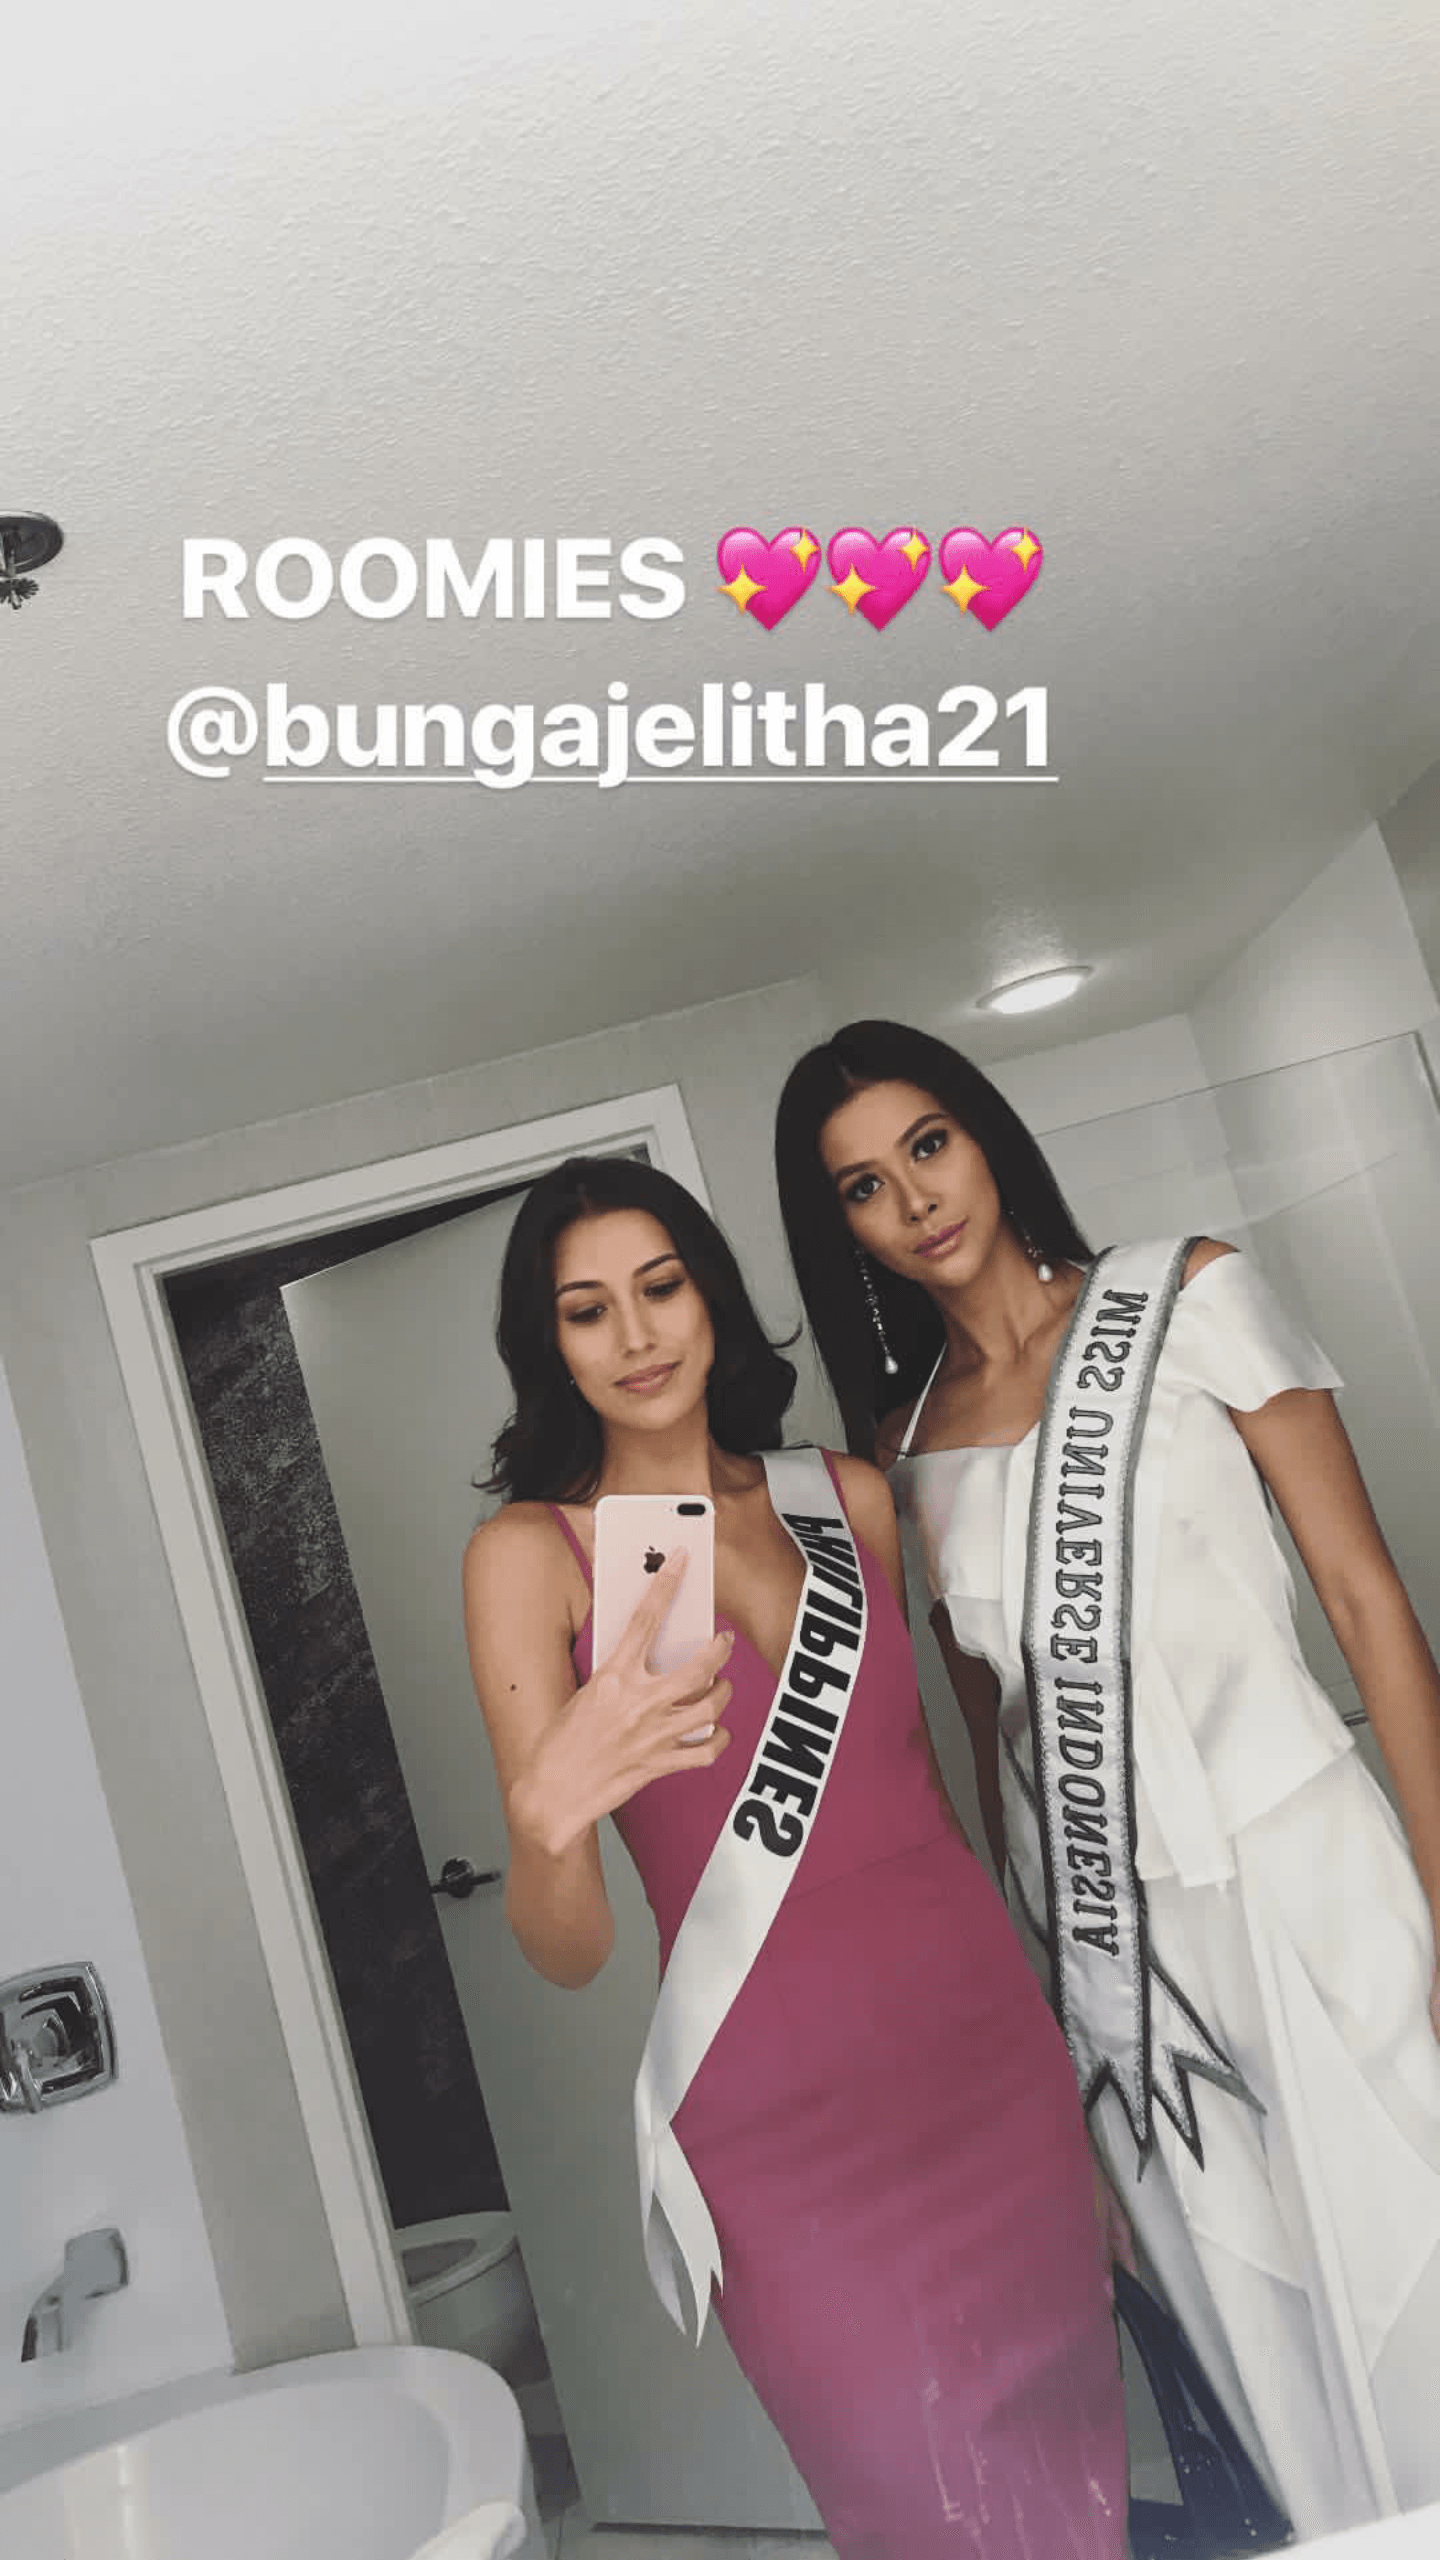 LOOK: Philippines, Indonesia are Miss Universe 2017 roomies